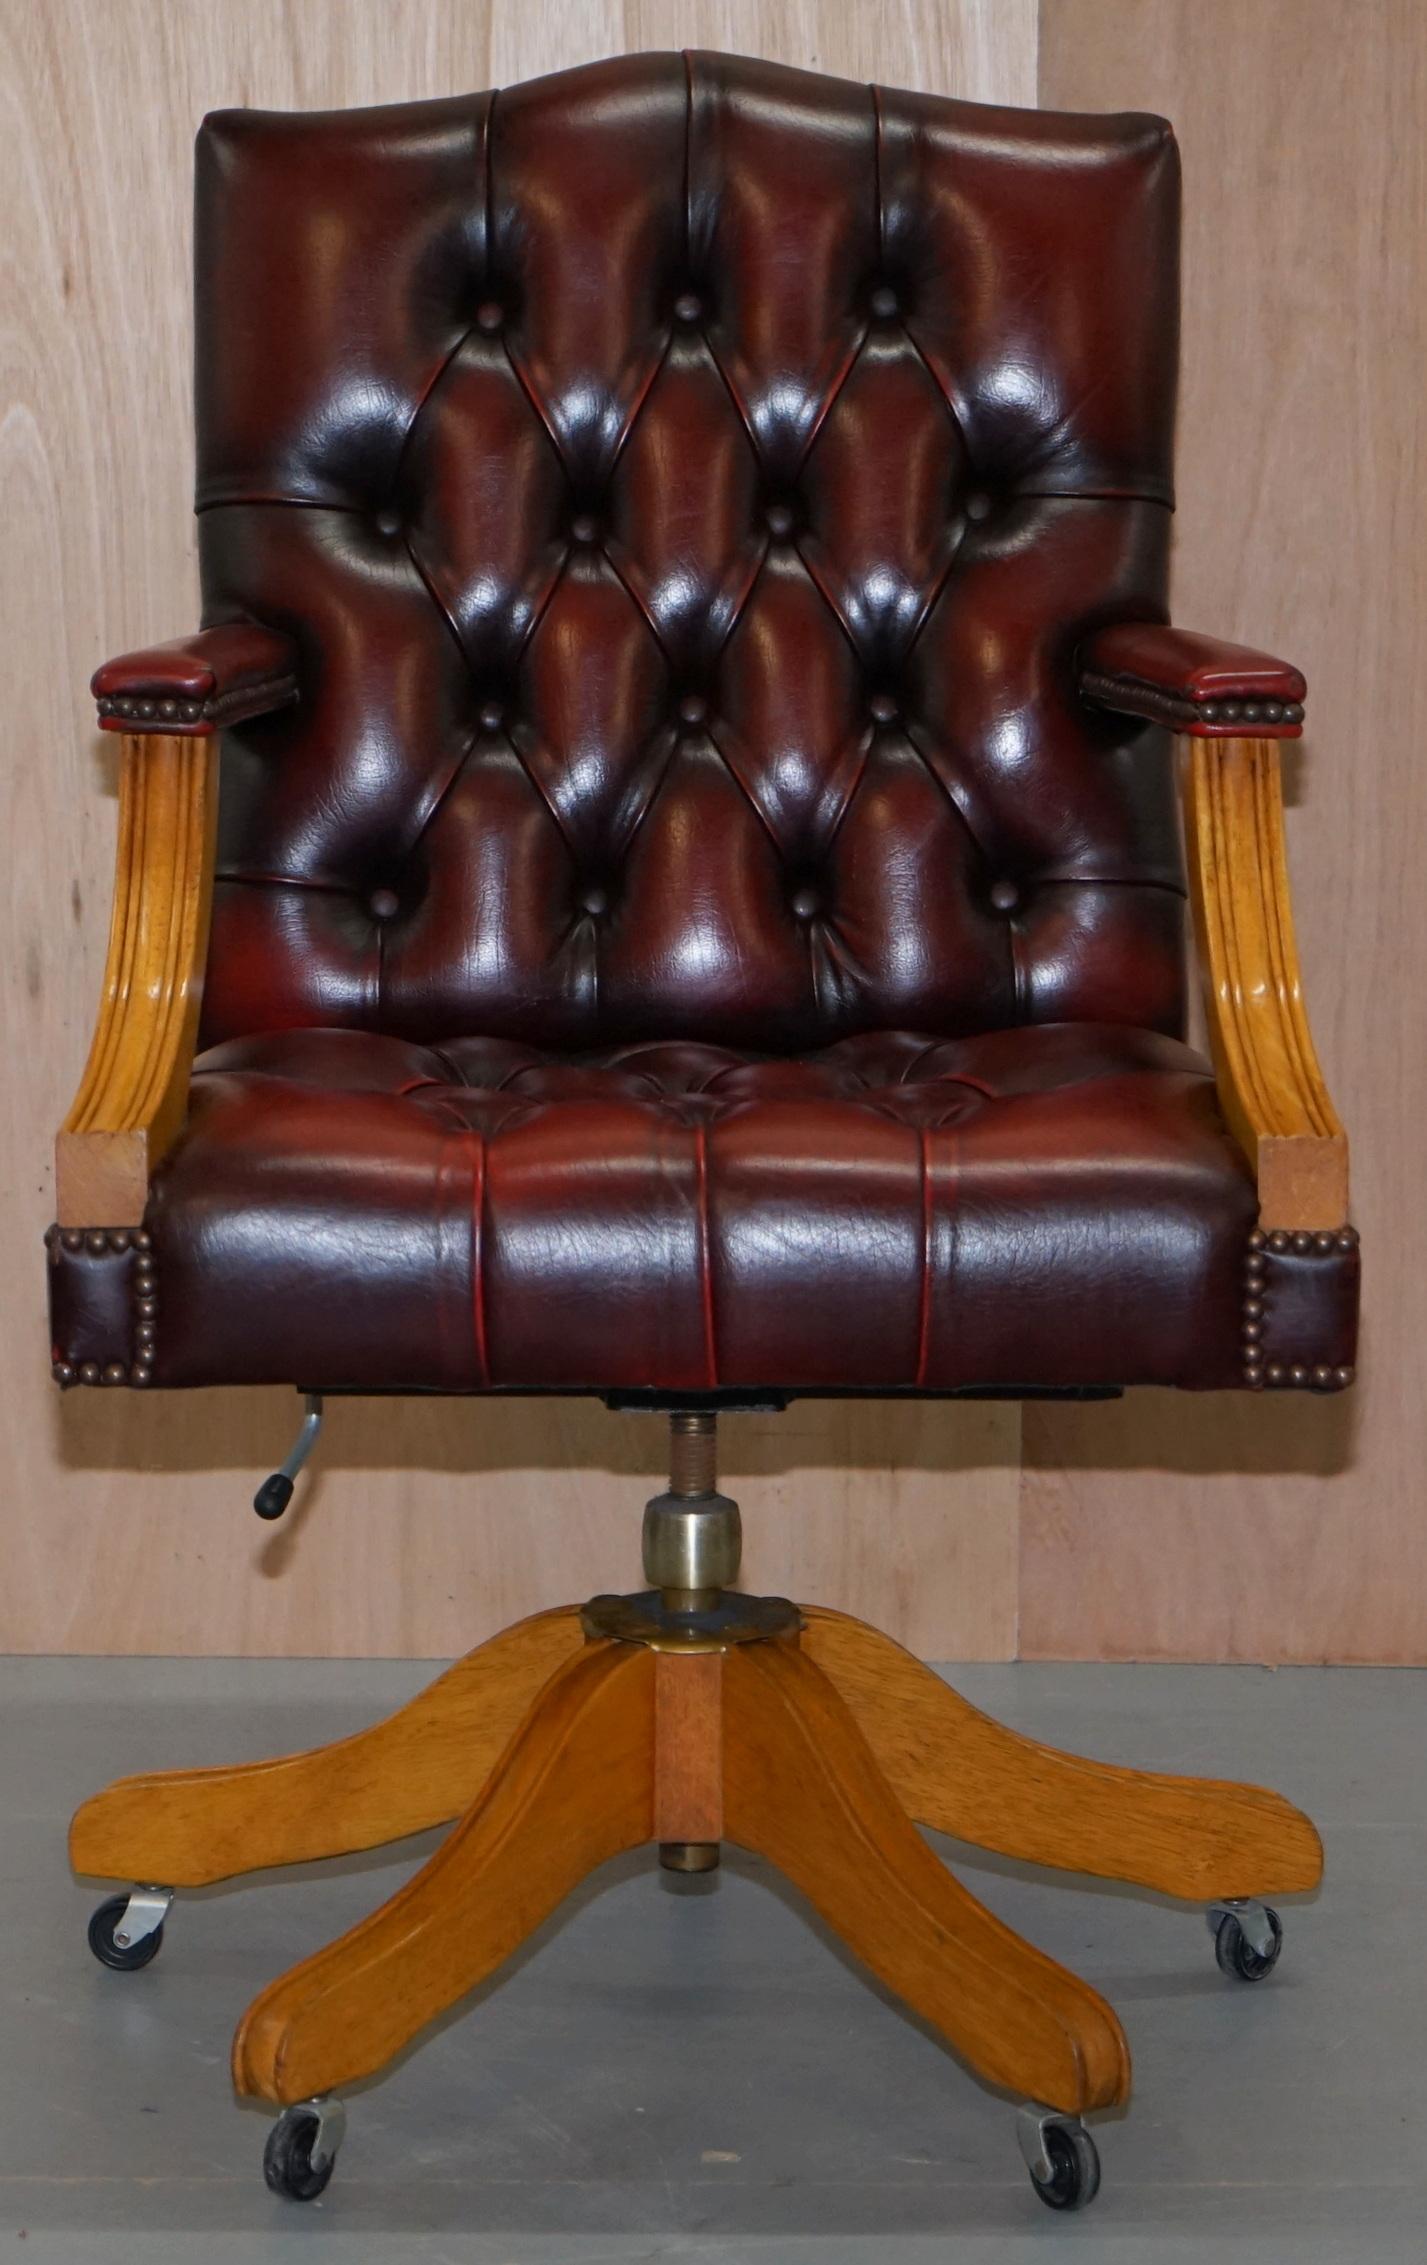 We are delighted to offer for sale this very nice vintage Oxblood leather Chesterfield buttoned Gainsborough captains office chair 

A good looking well made and comfortable chair, the design goes back hundreds of years and is very collectable for